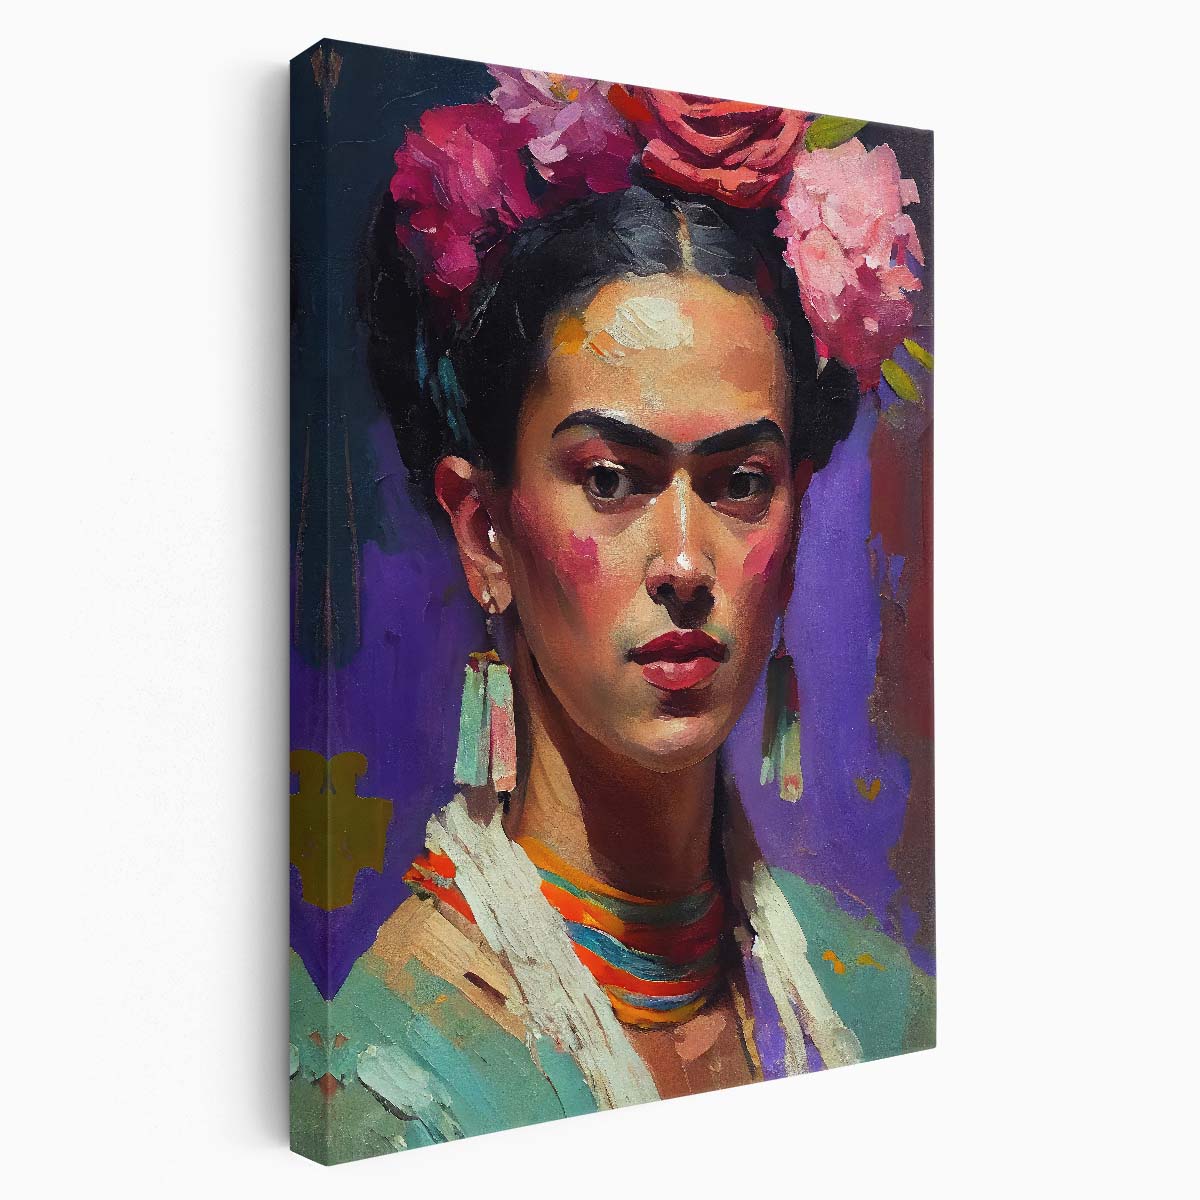 Frida Kahlo Portrait Illustration, Colorful Digital Art with Flowers by Luxuriance Designs, made in USA